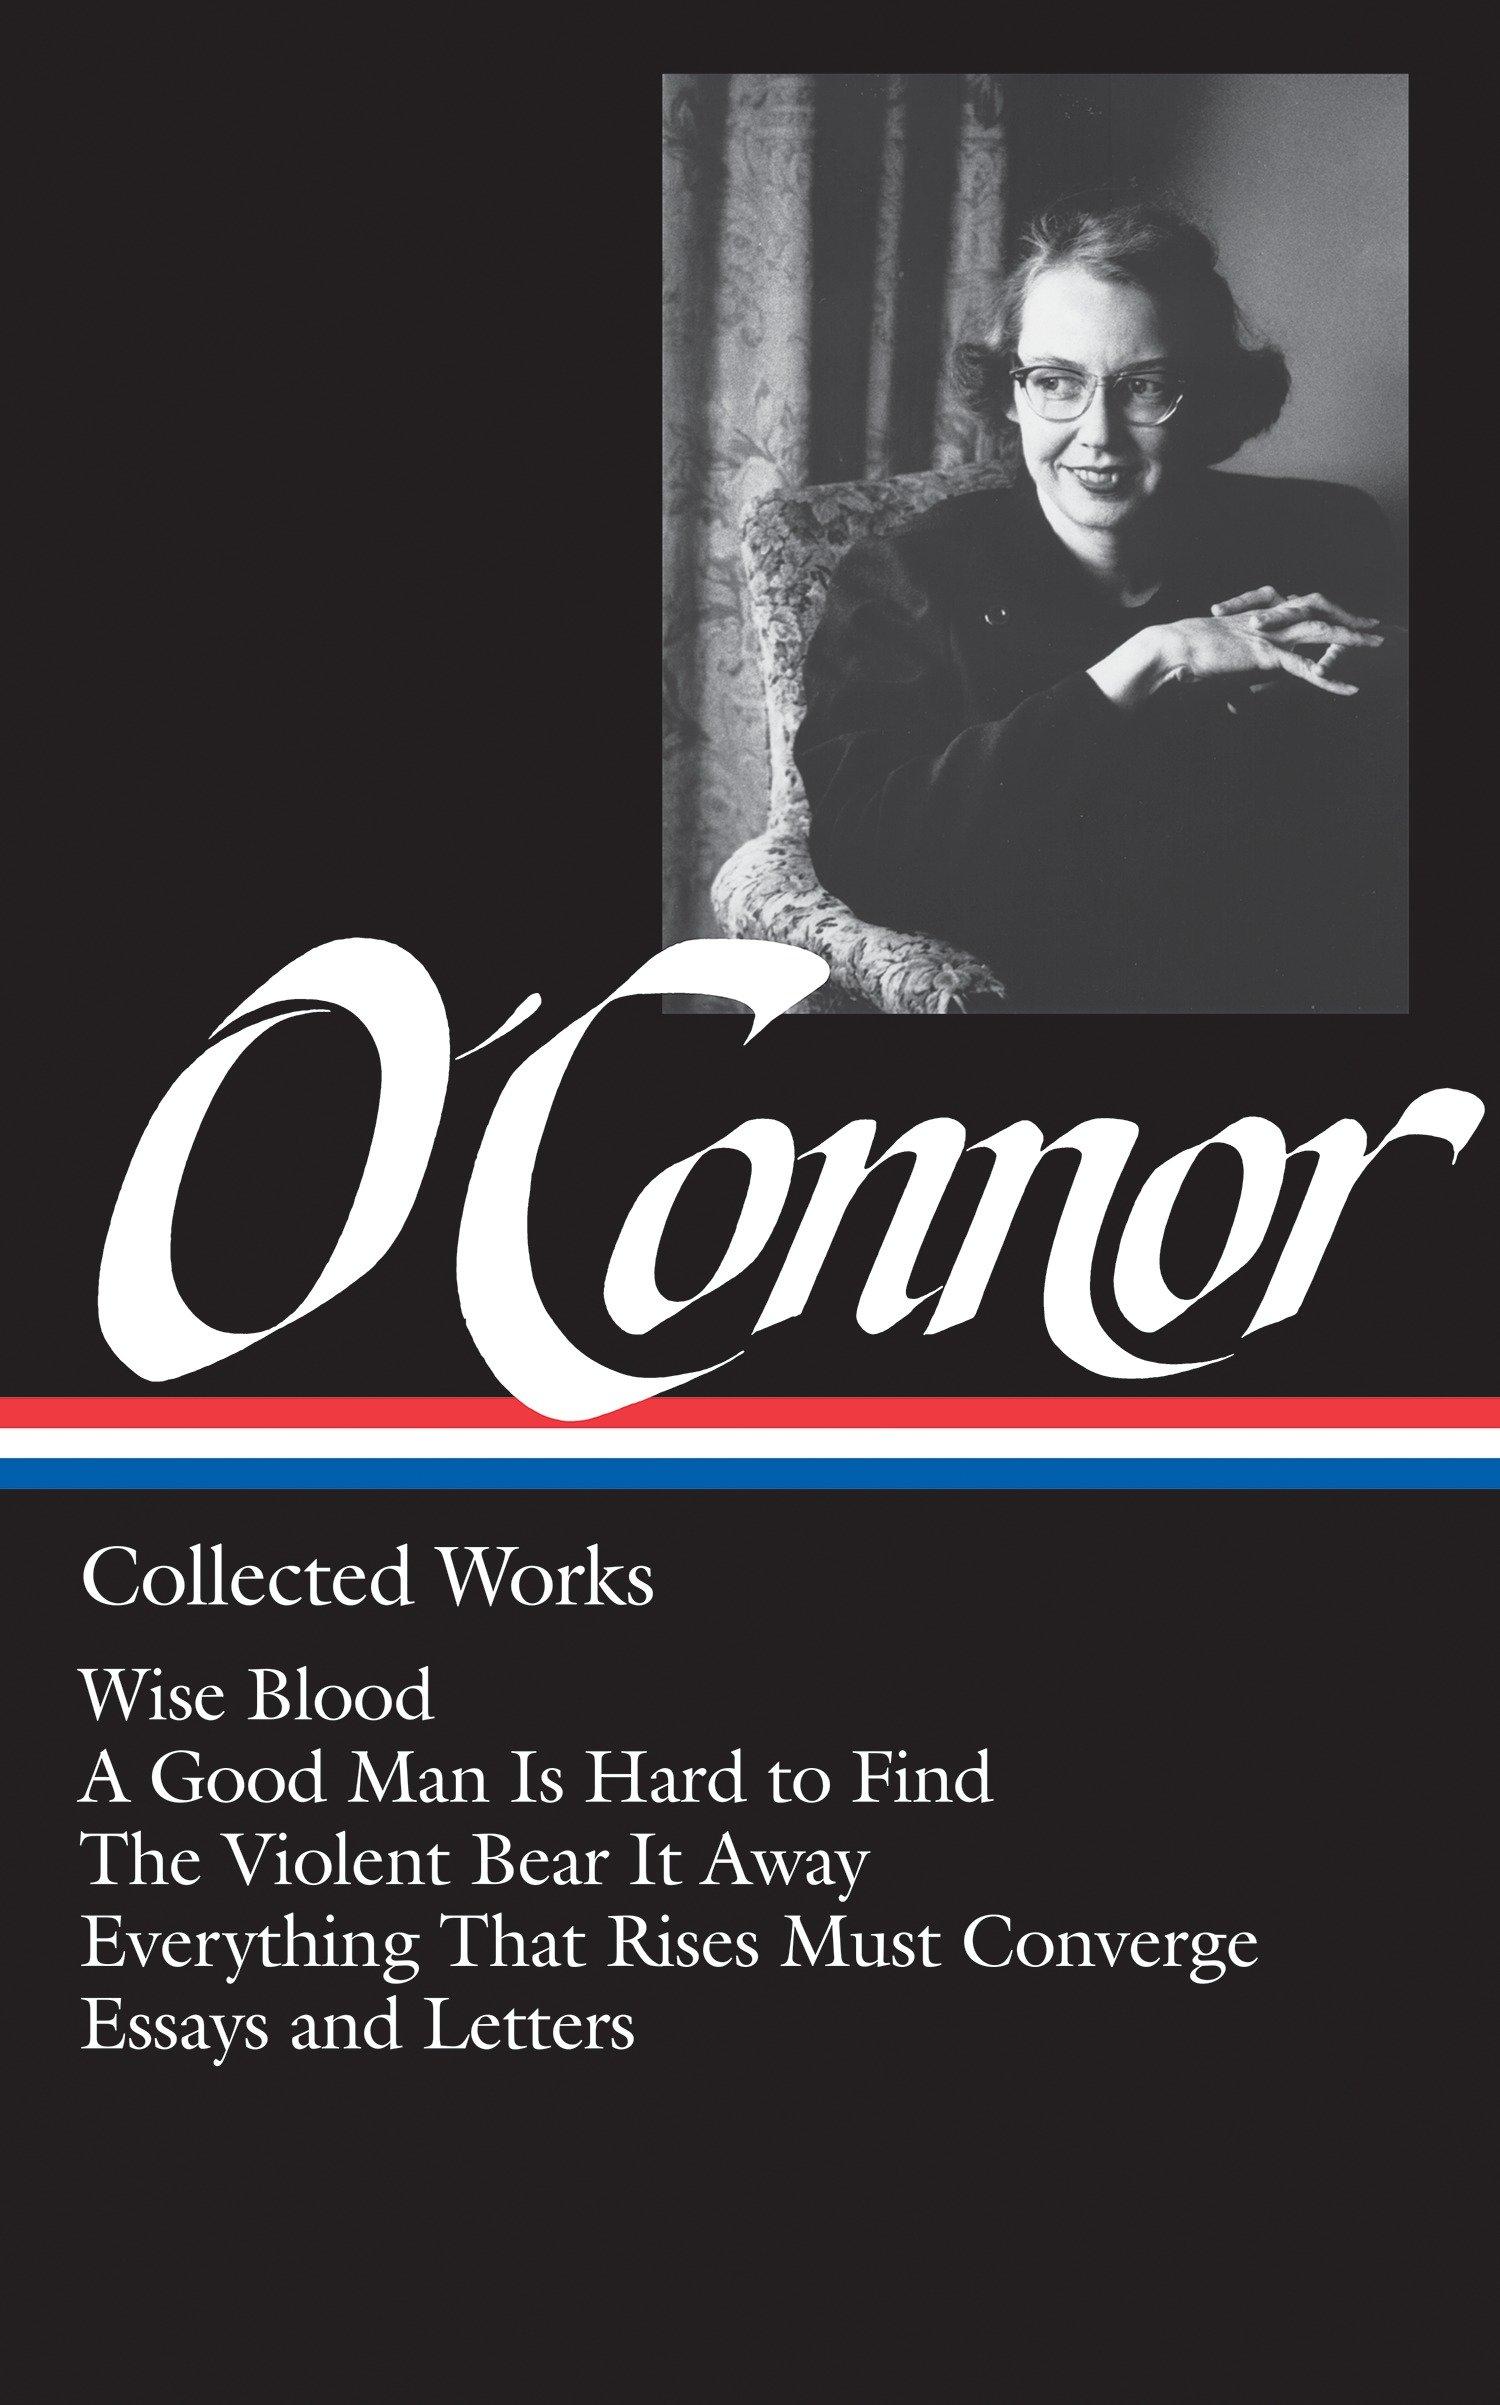 Flannery O'Connor: Collected Works (LOA #39) / Wise Blood / A Good Man Is Hard to Find / The Violent Bear It Away / Everything That Rises Must Converge / Stories, essays, letters / Flannery O'Connor - O'Connor, Flannery